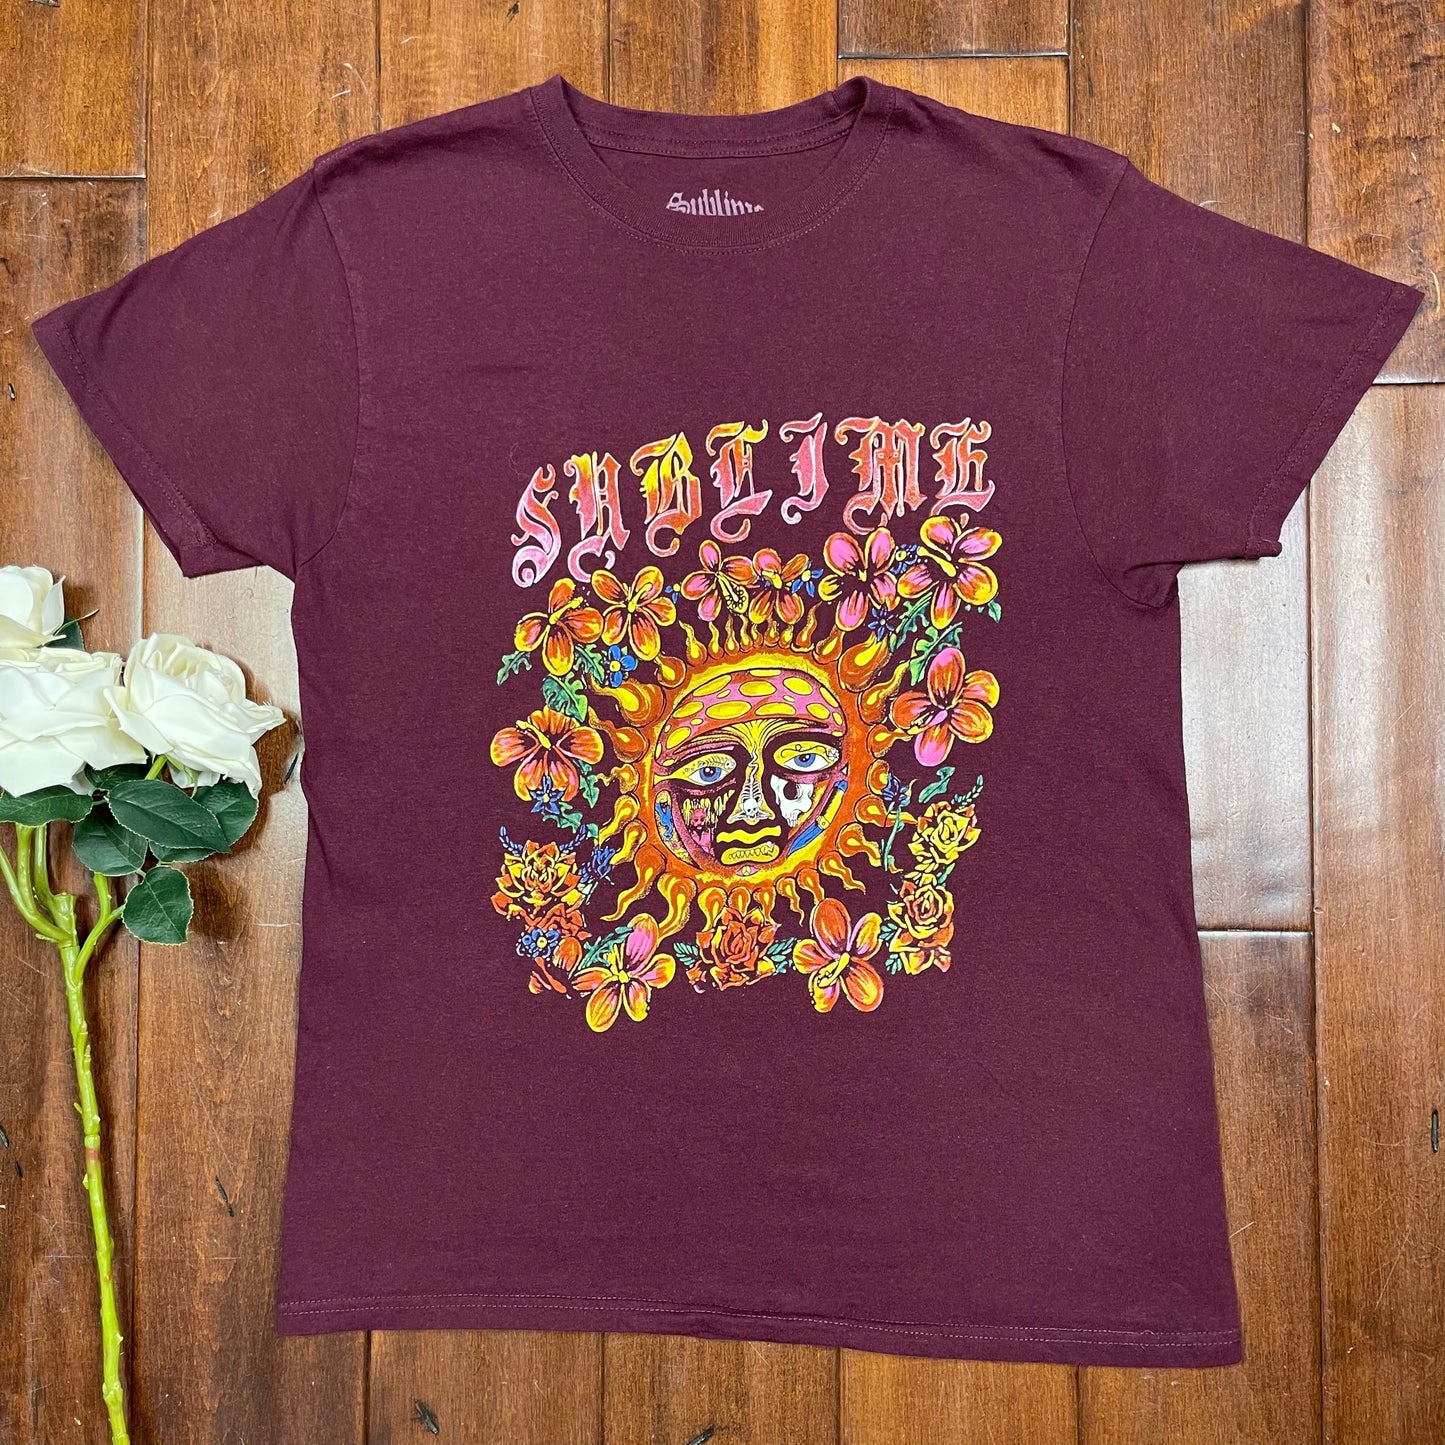 THRIFTED SUBLIME TEE